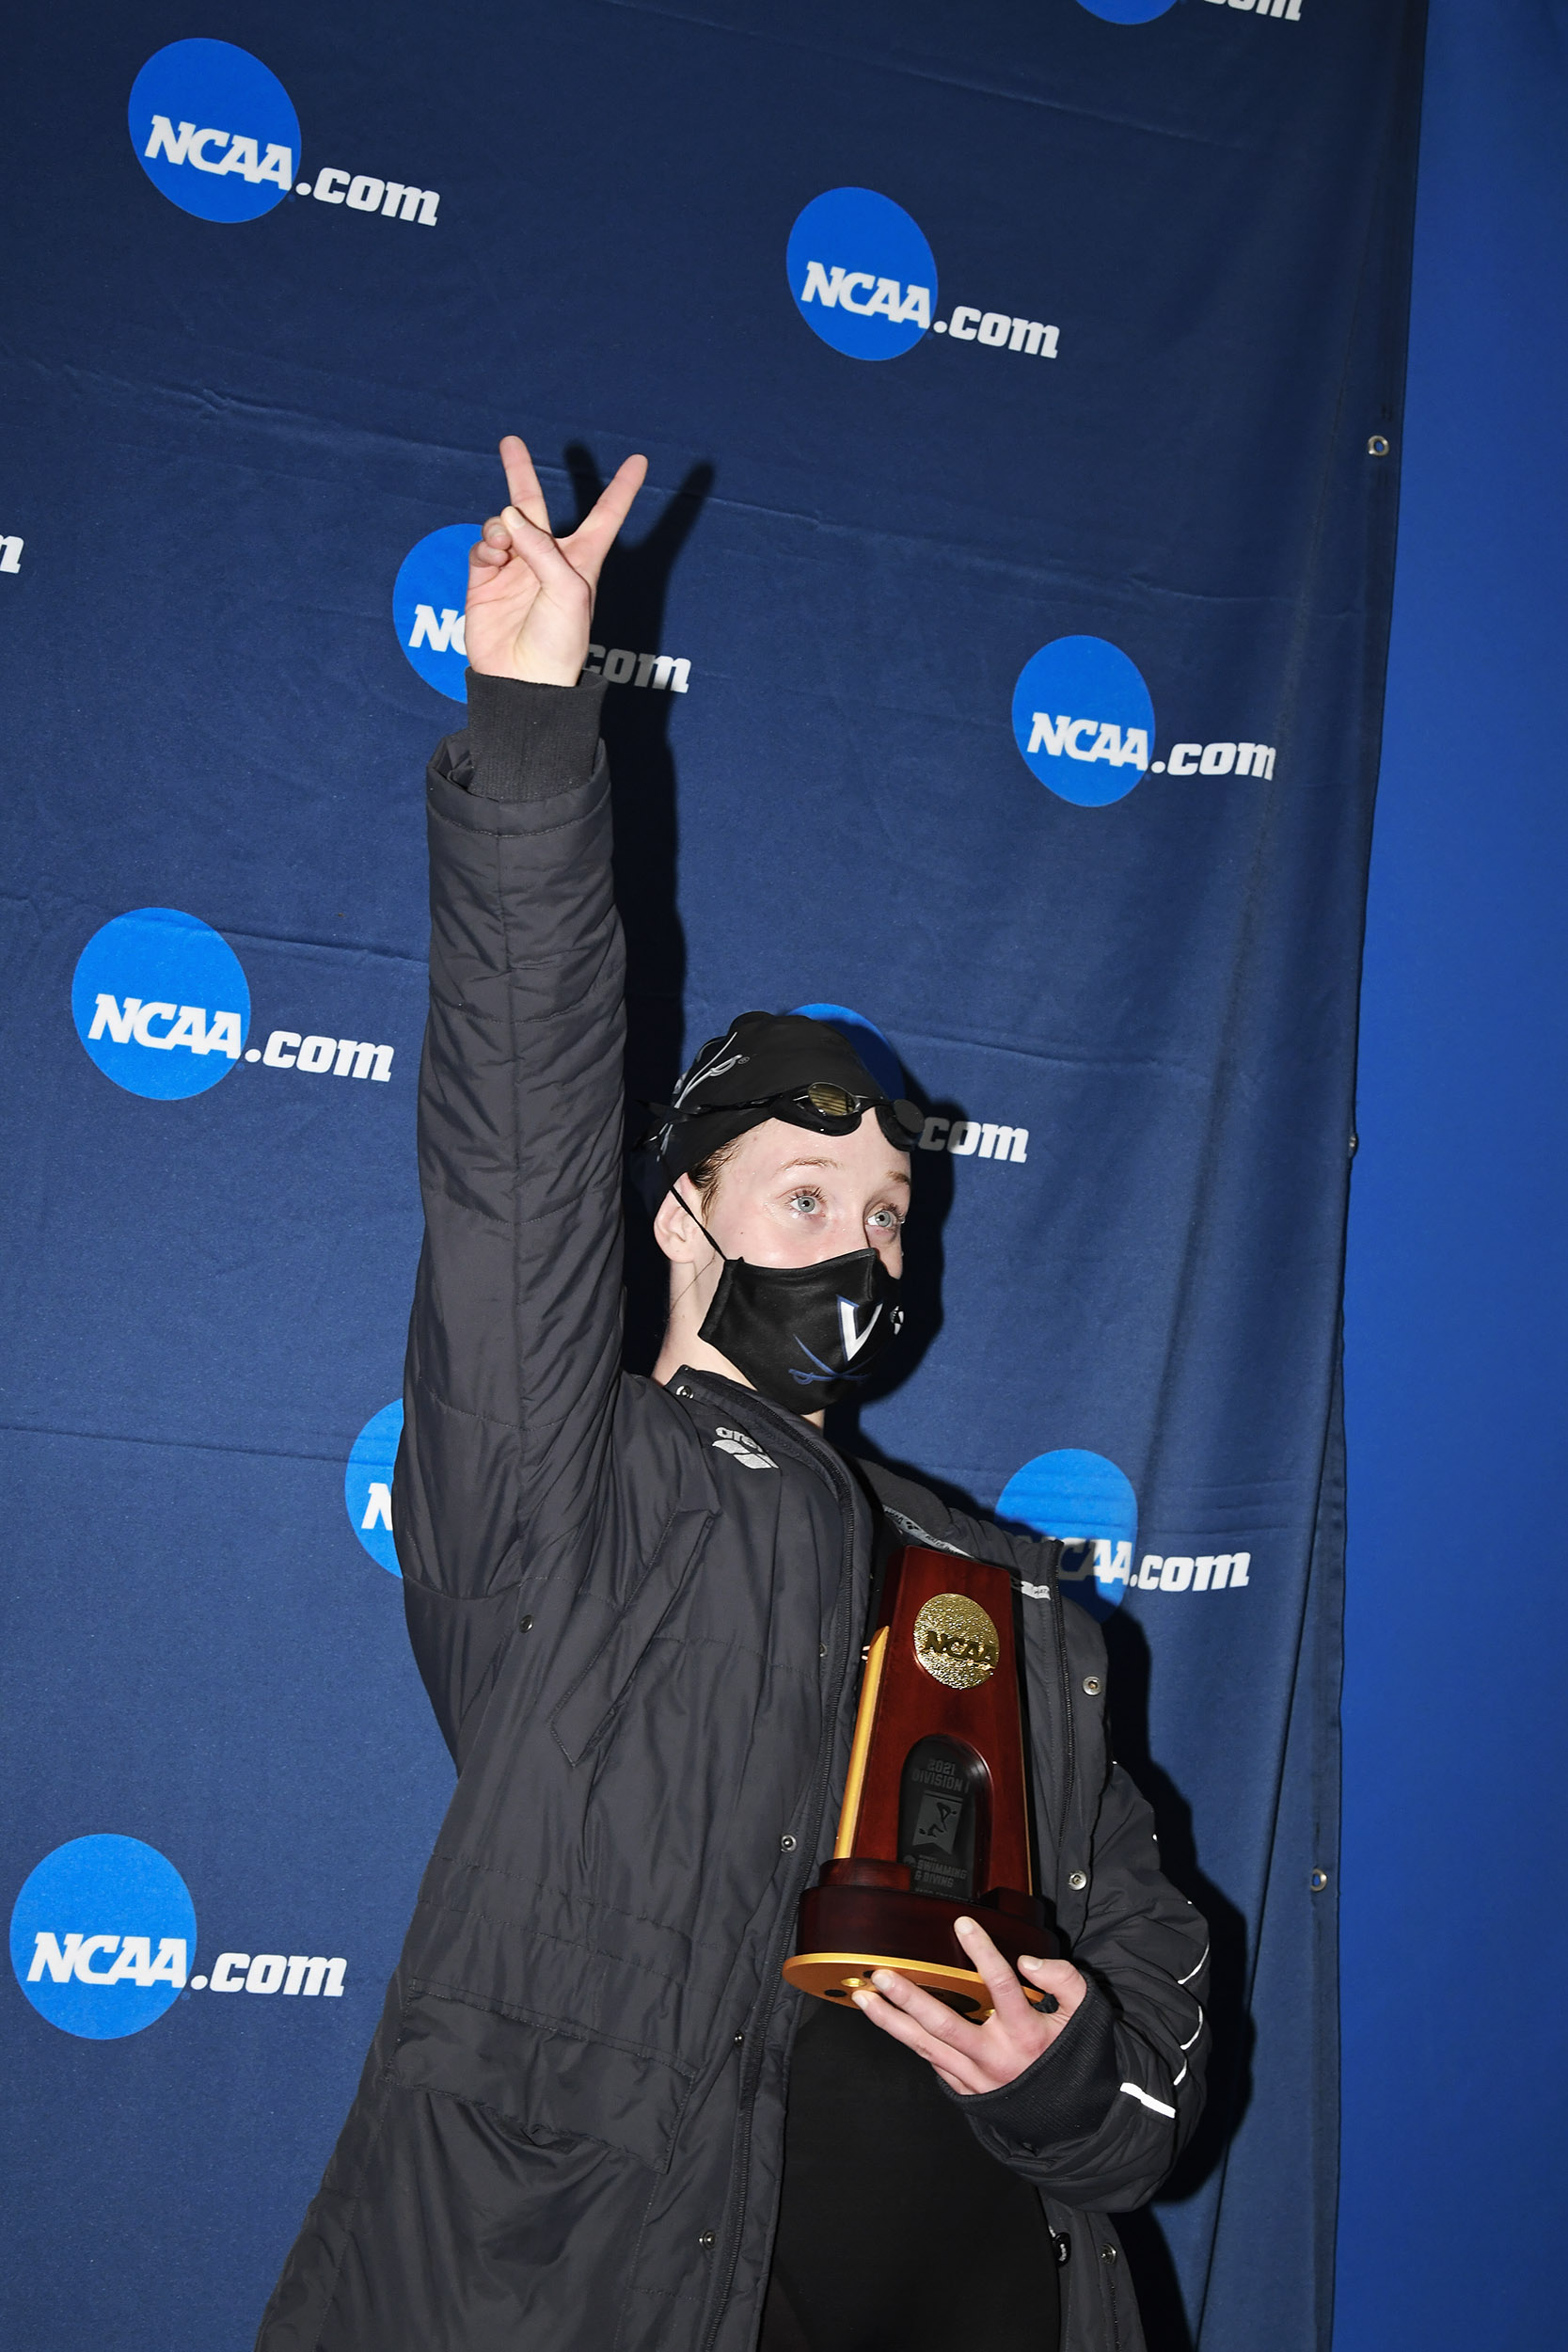 Paige Madden raising her arm while holding the NCAA trophy